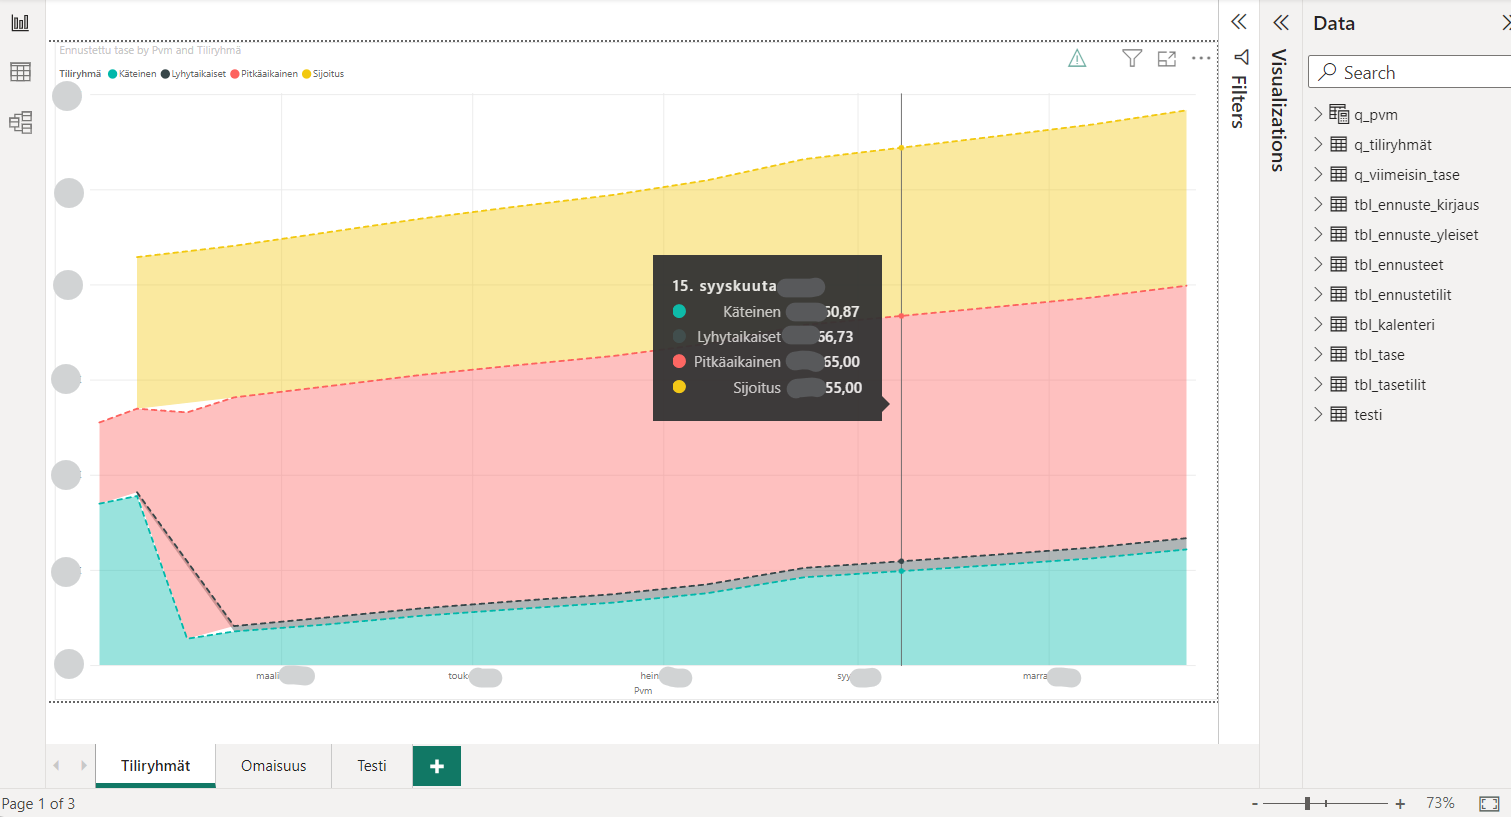 Example of visualizations for wealth tracking in a reporting tool.